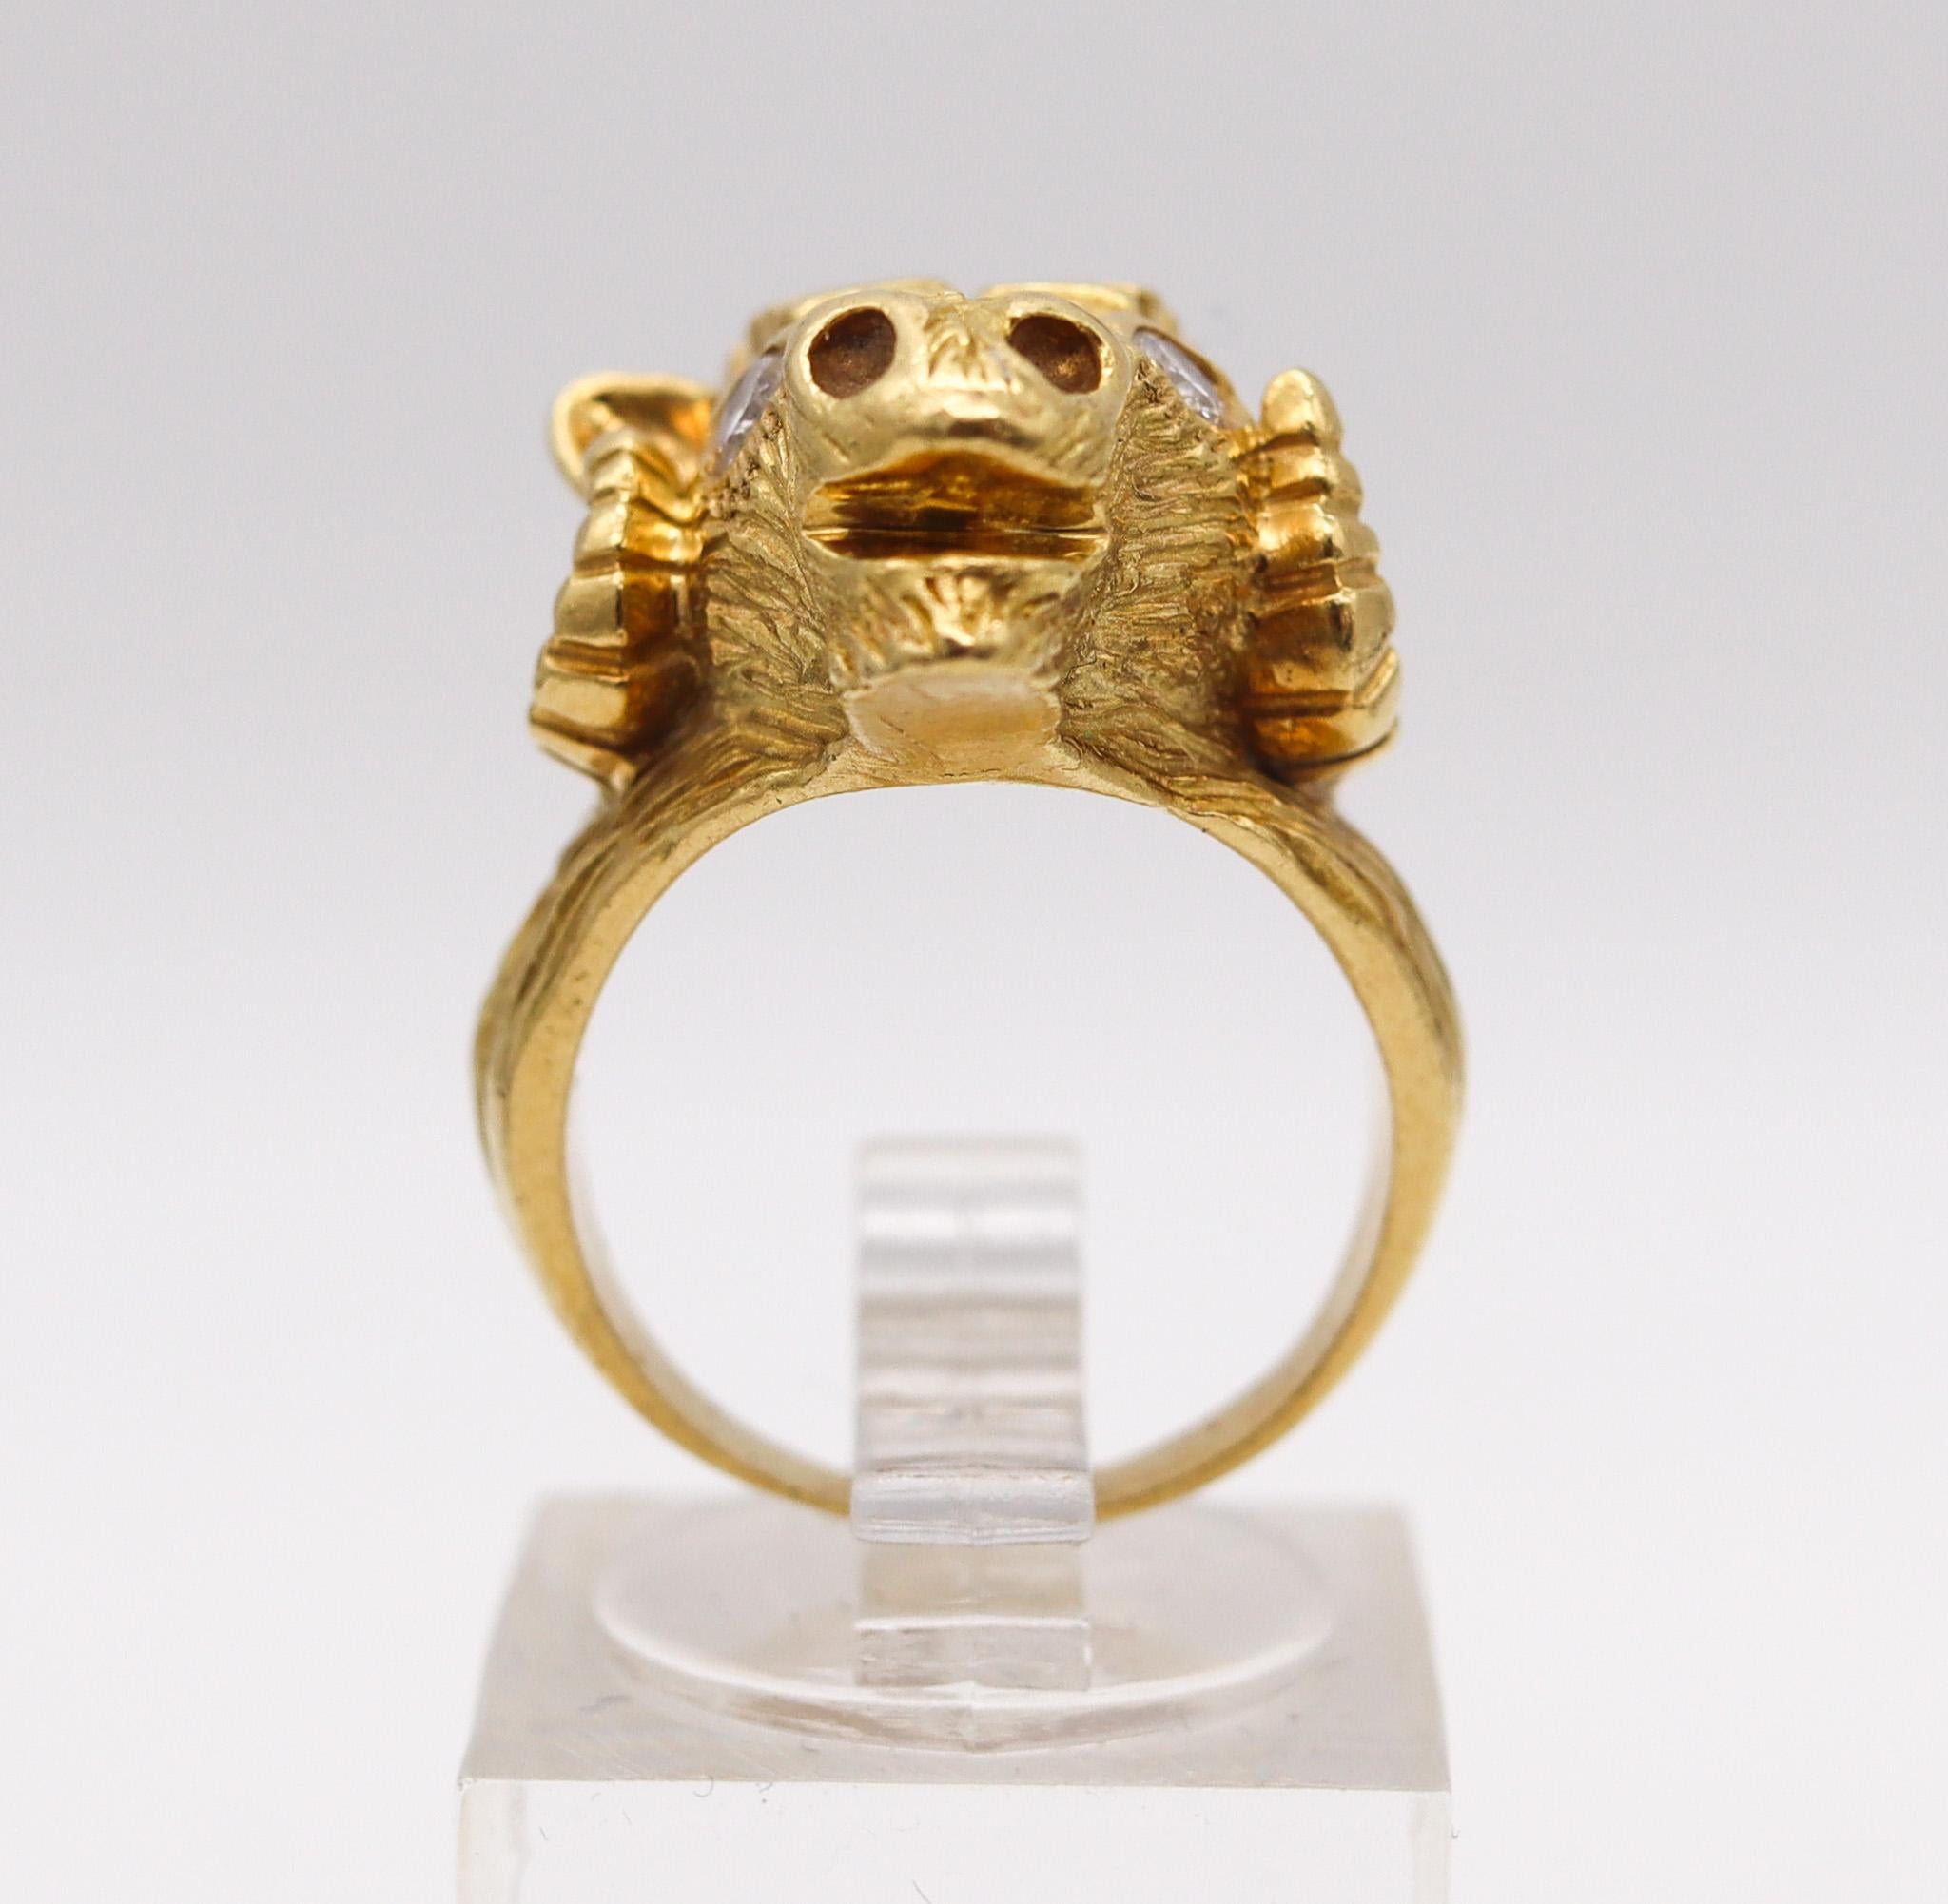 Modernist Van Cleef & Arpels 1970 Taurus Zodiacal Ring In 18Kt Gold With Two Diamonds For Sale